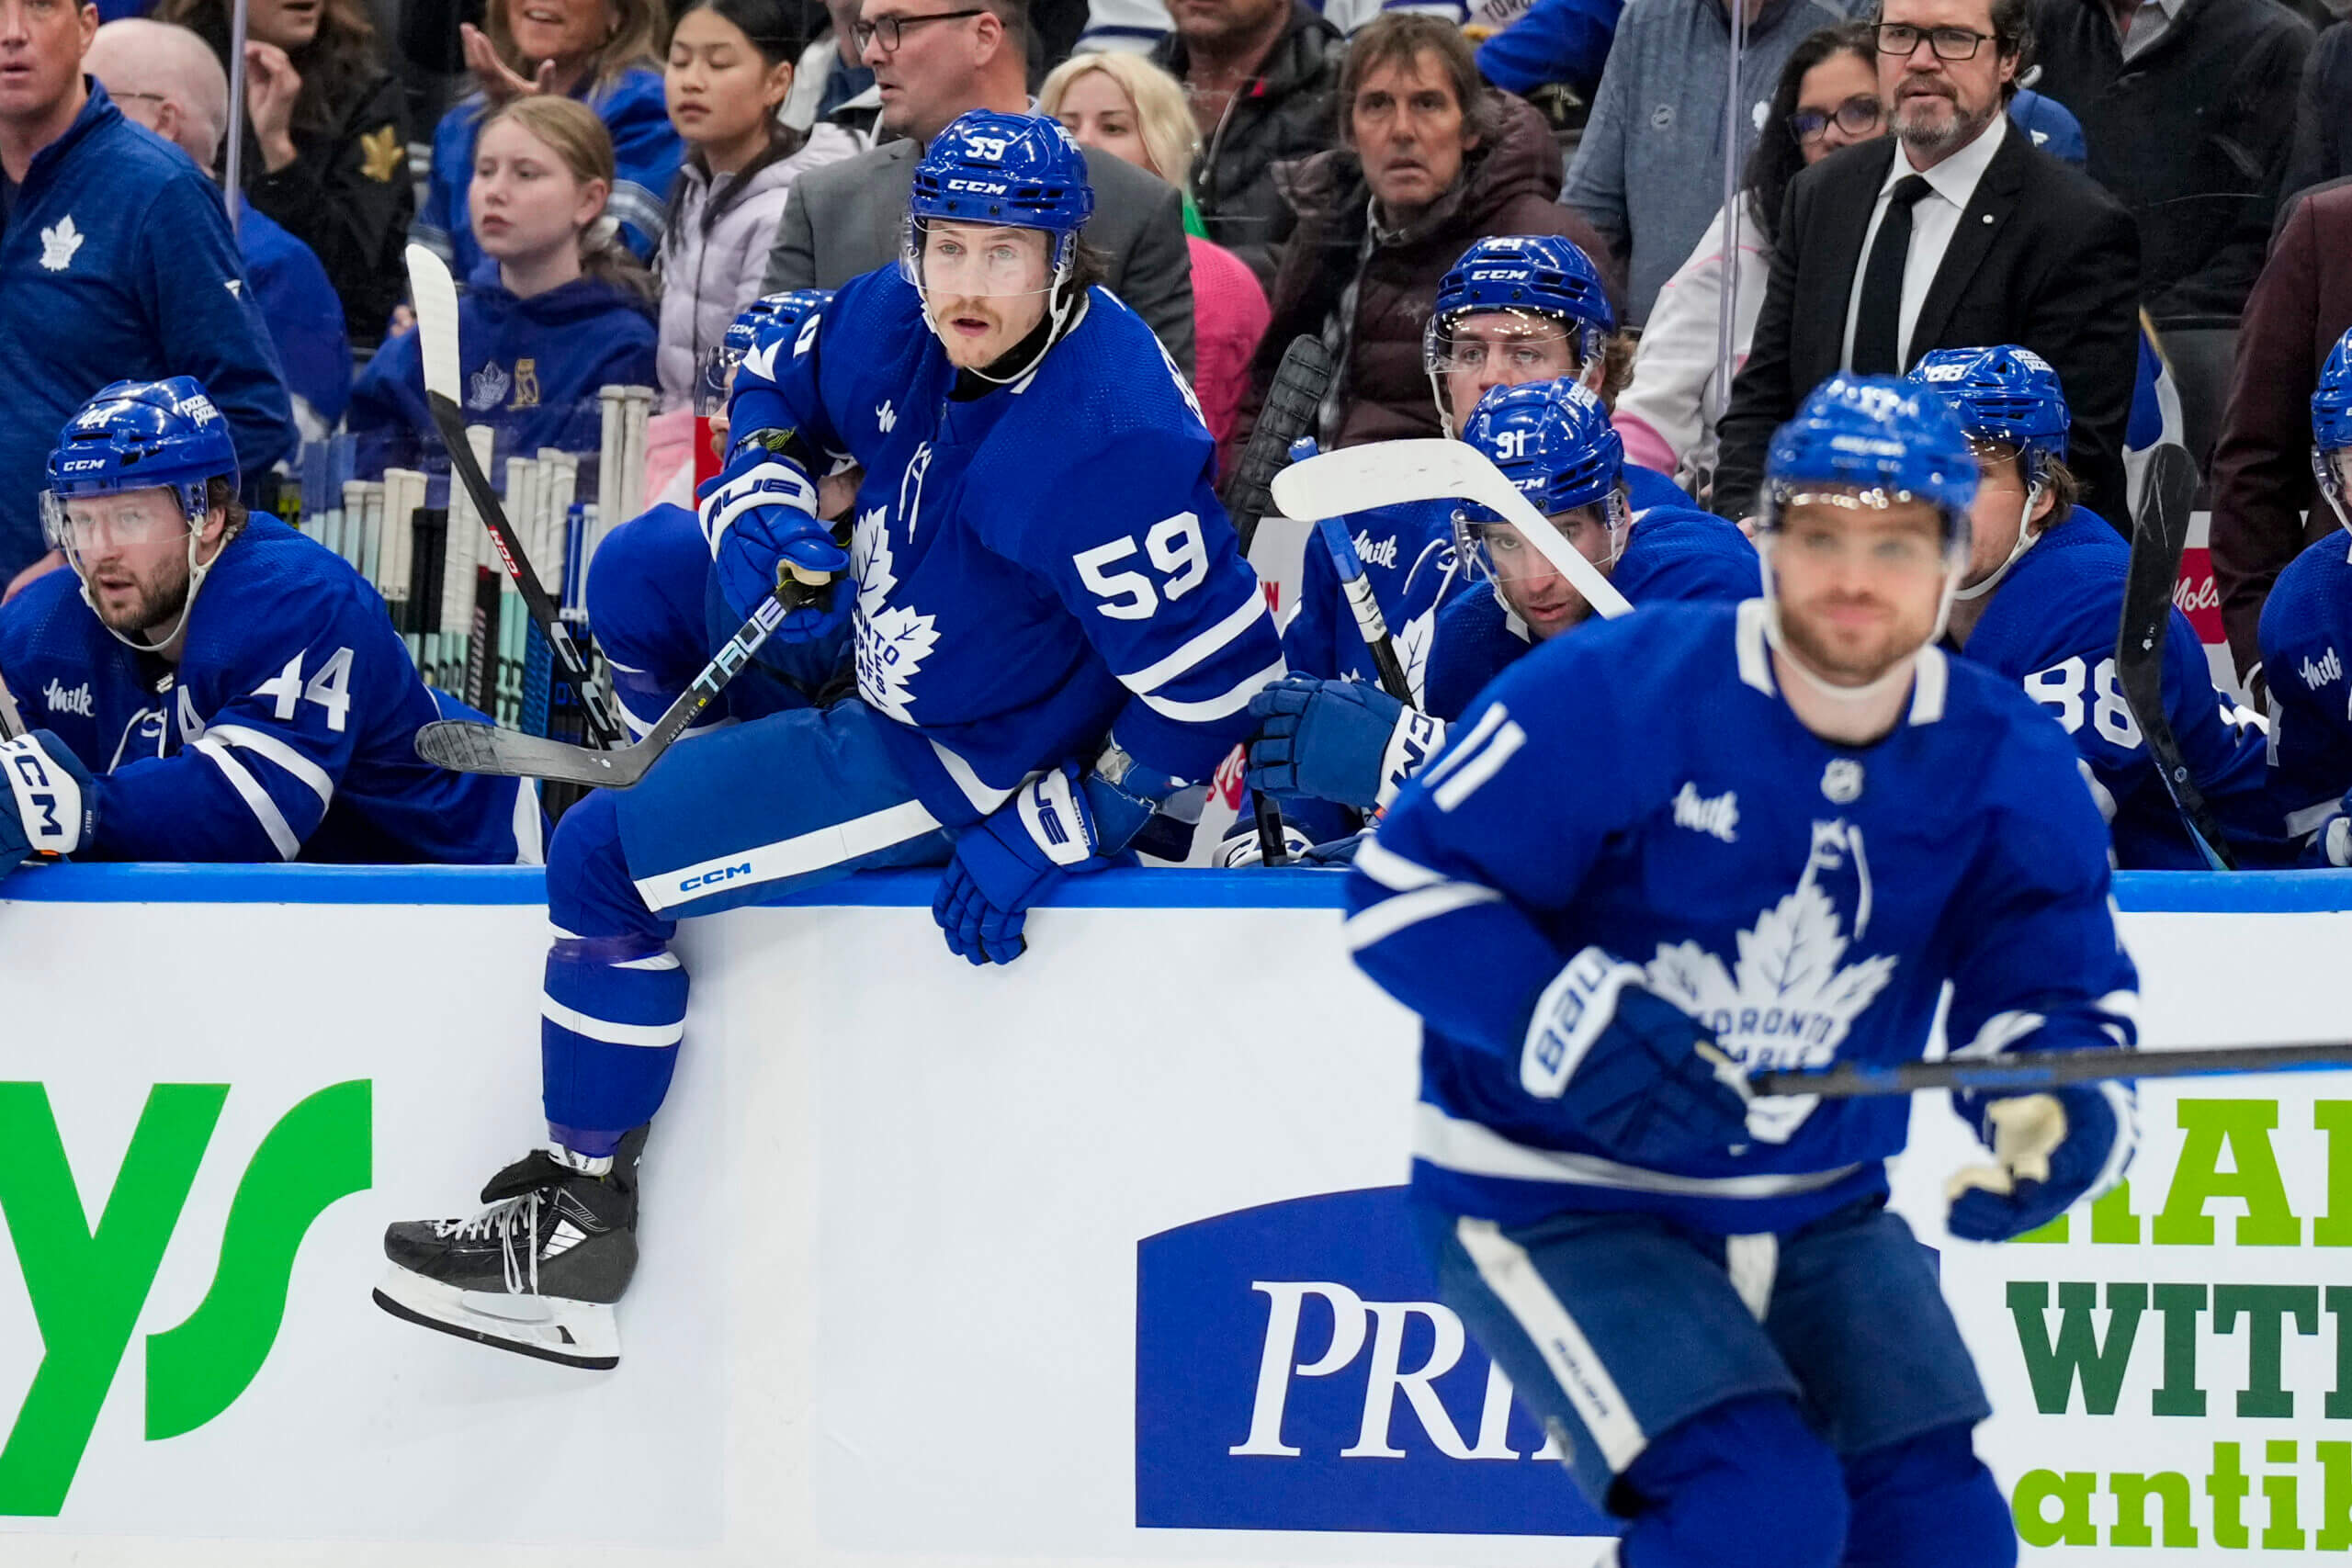 Maple Leafs depth chart 1.0: What are the biggest needs this offseason?